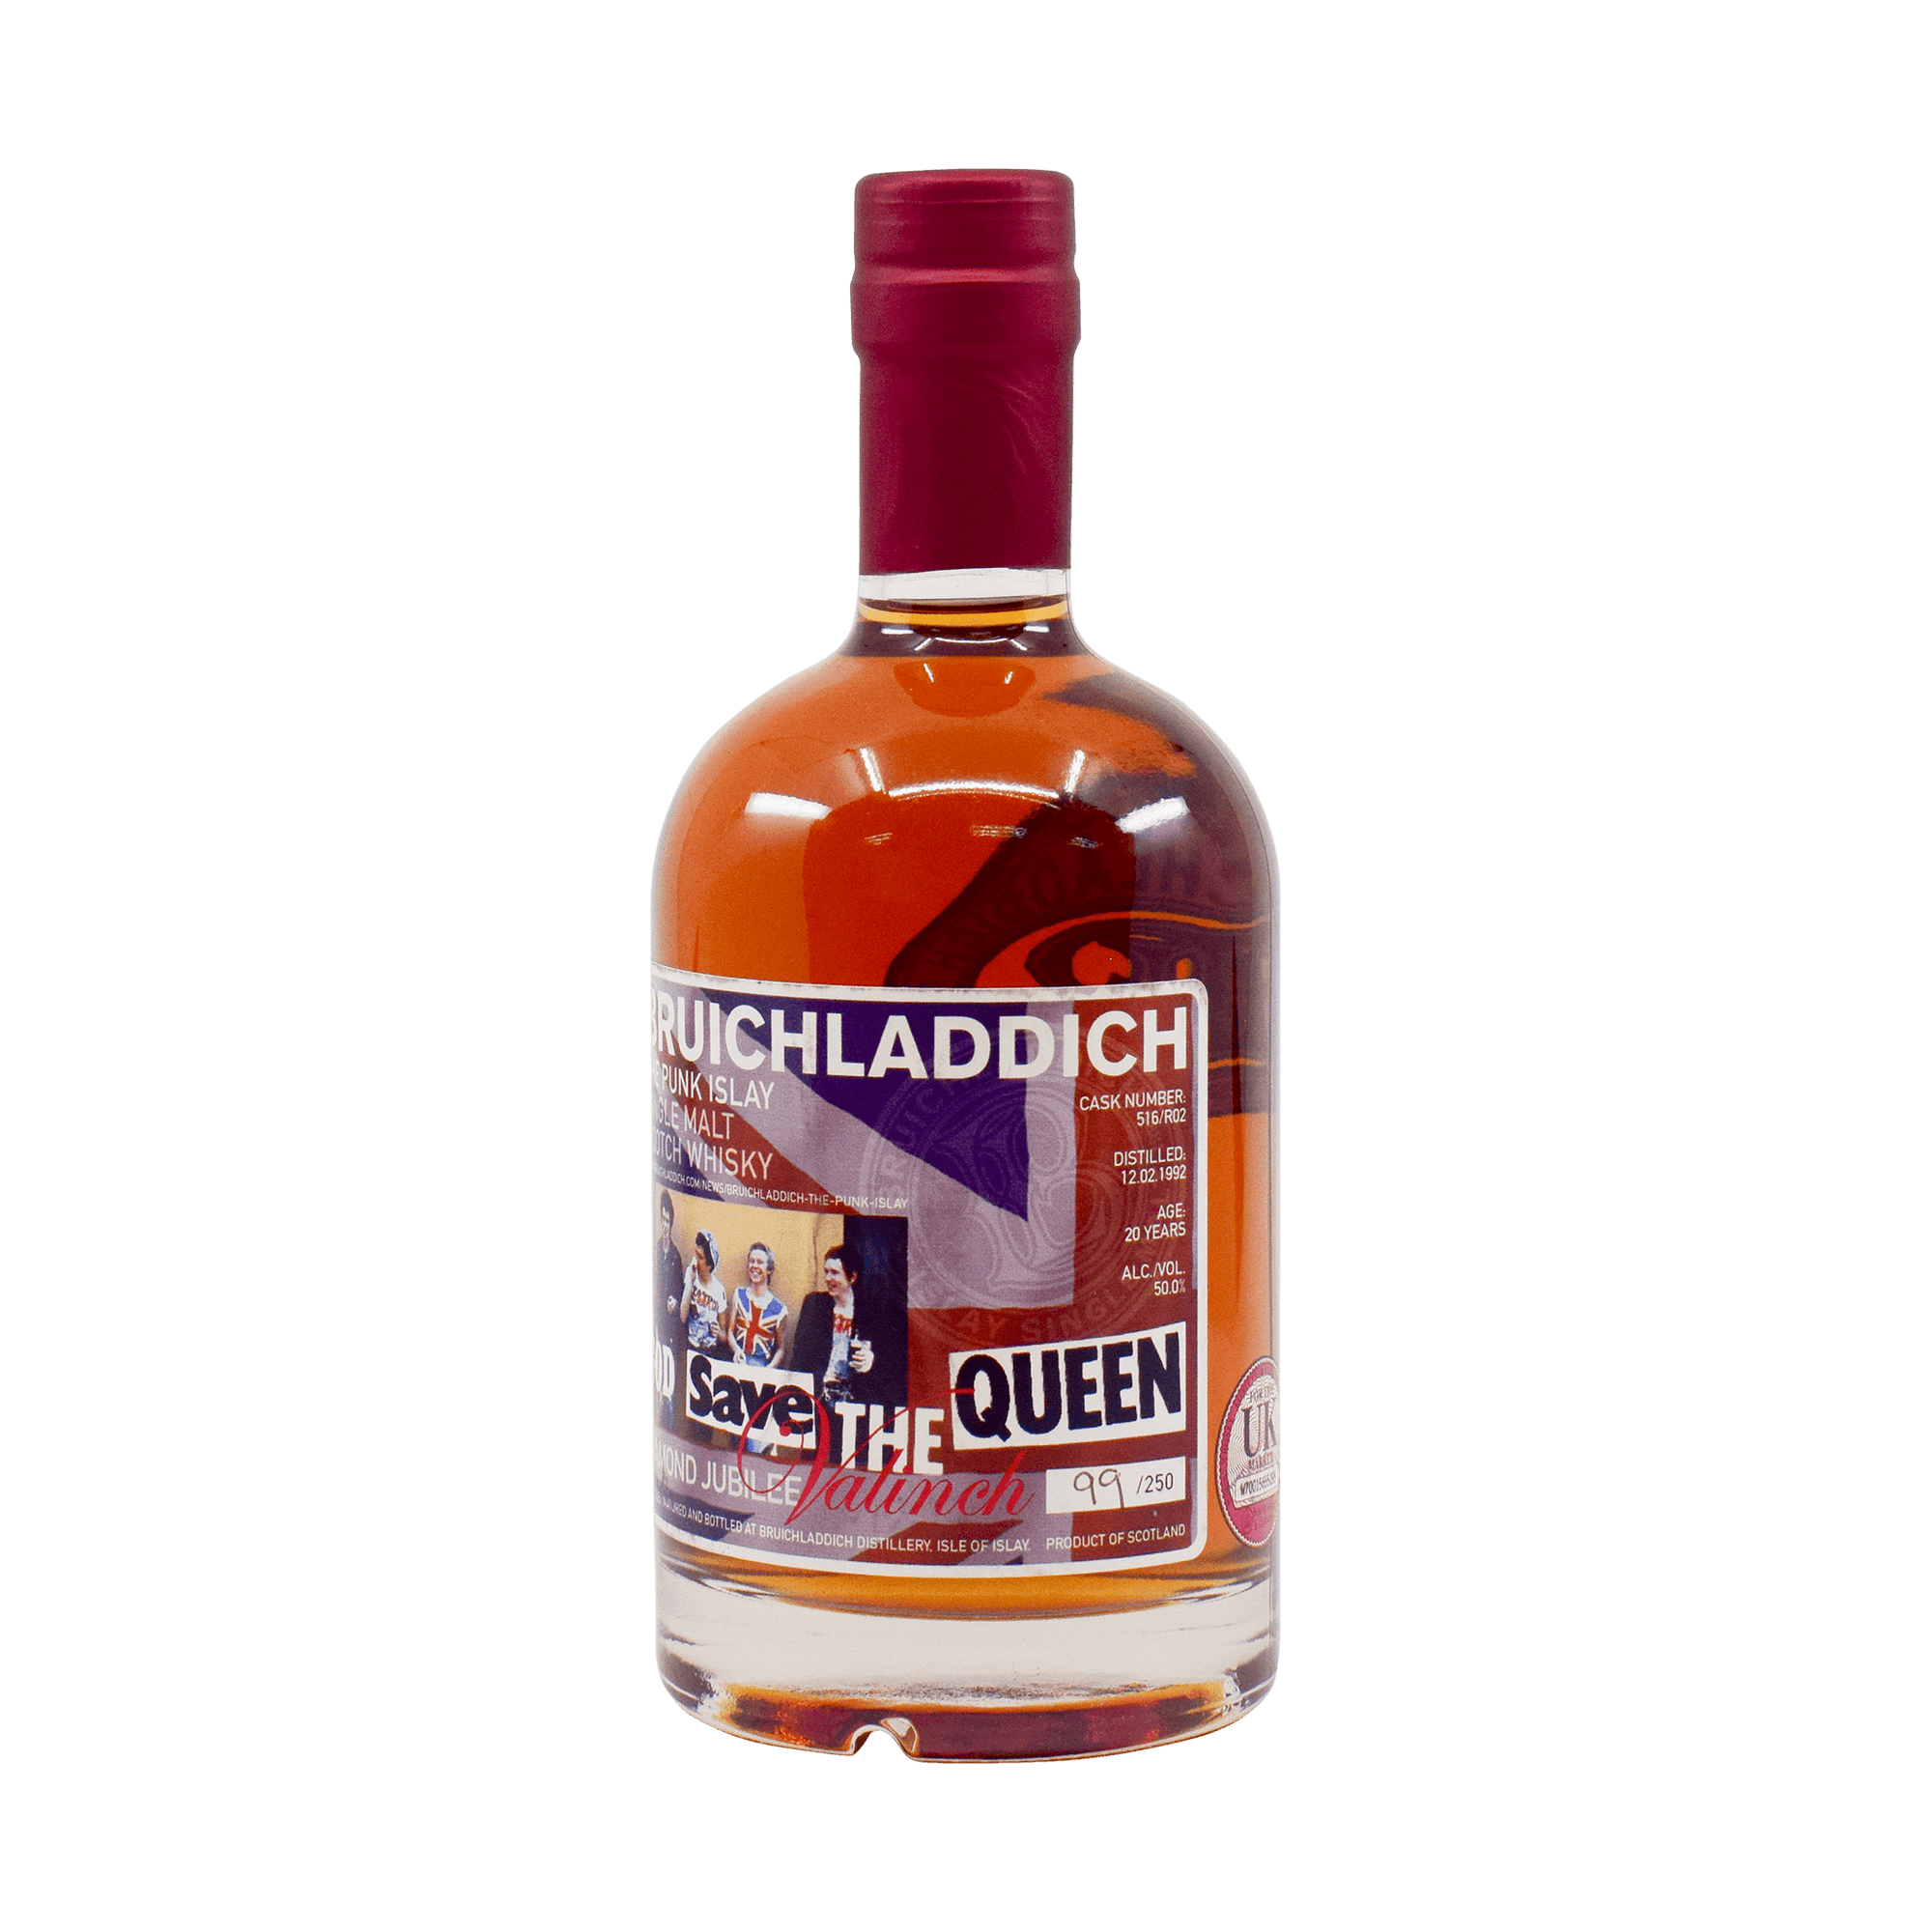 Bruichladdich 1992 20 Year Old 'Valinch – Diamond Jubilee' God Save the Queen 50.00% 50cl